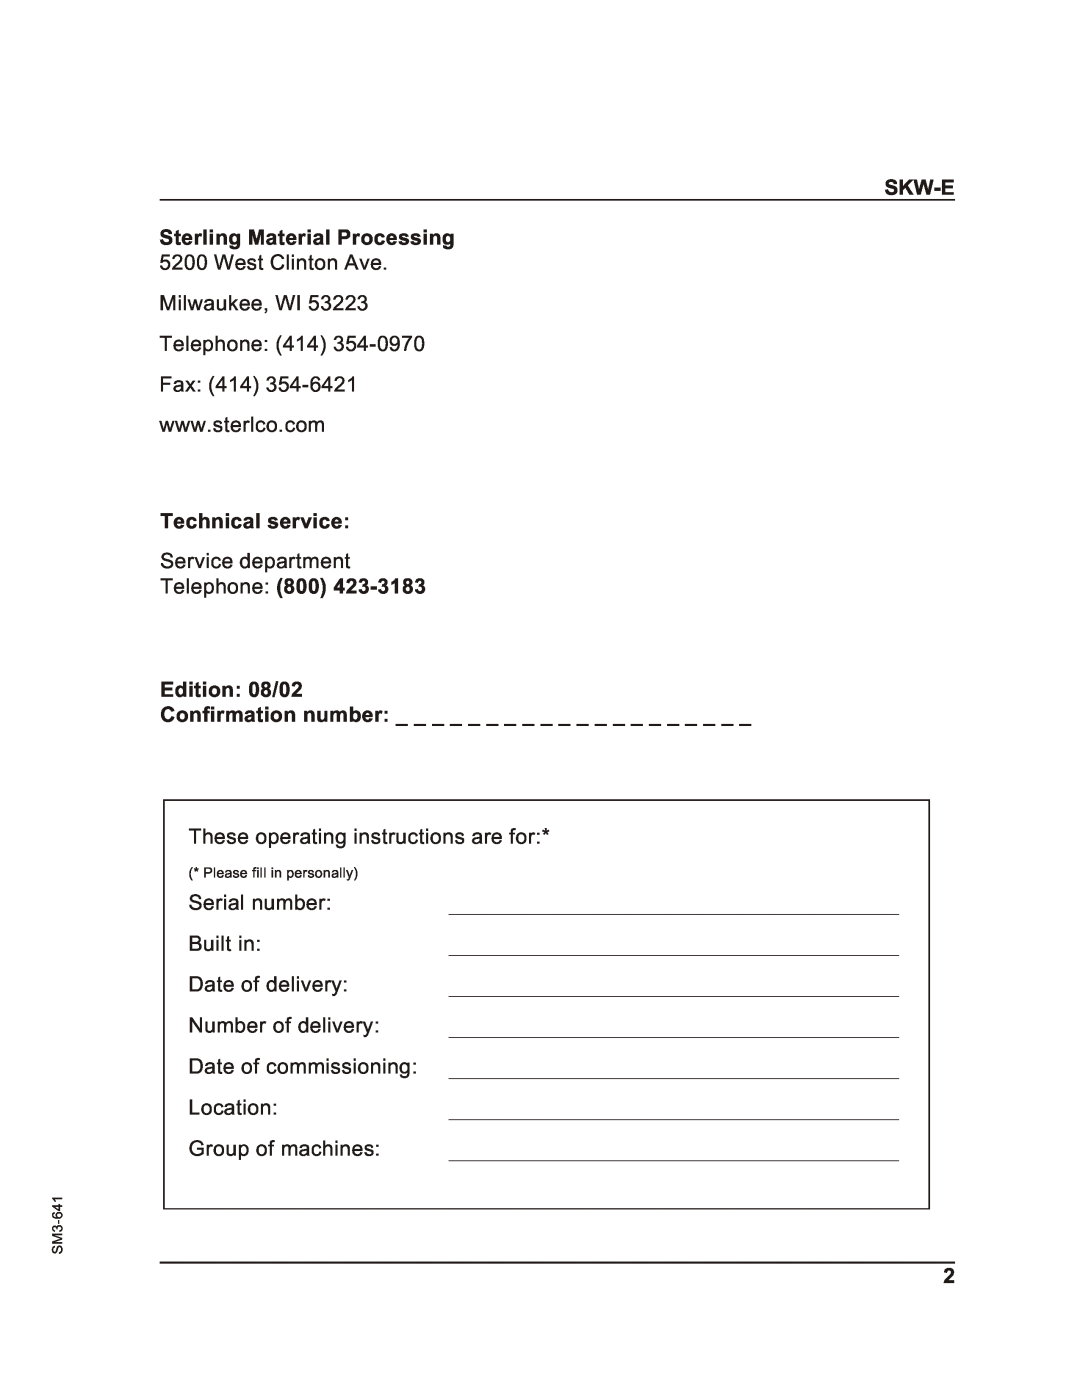 Sterling Plumbing manual SKW-E Sterling Material Processing, Technical service, Telephone 800 Edition 08/02 